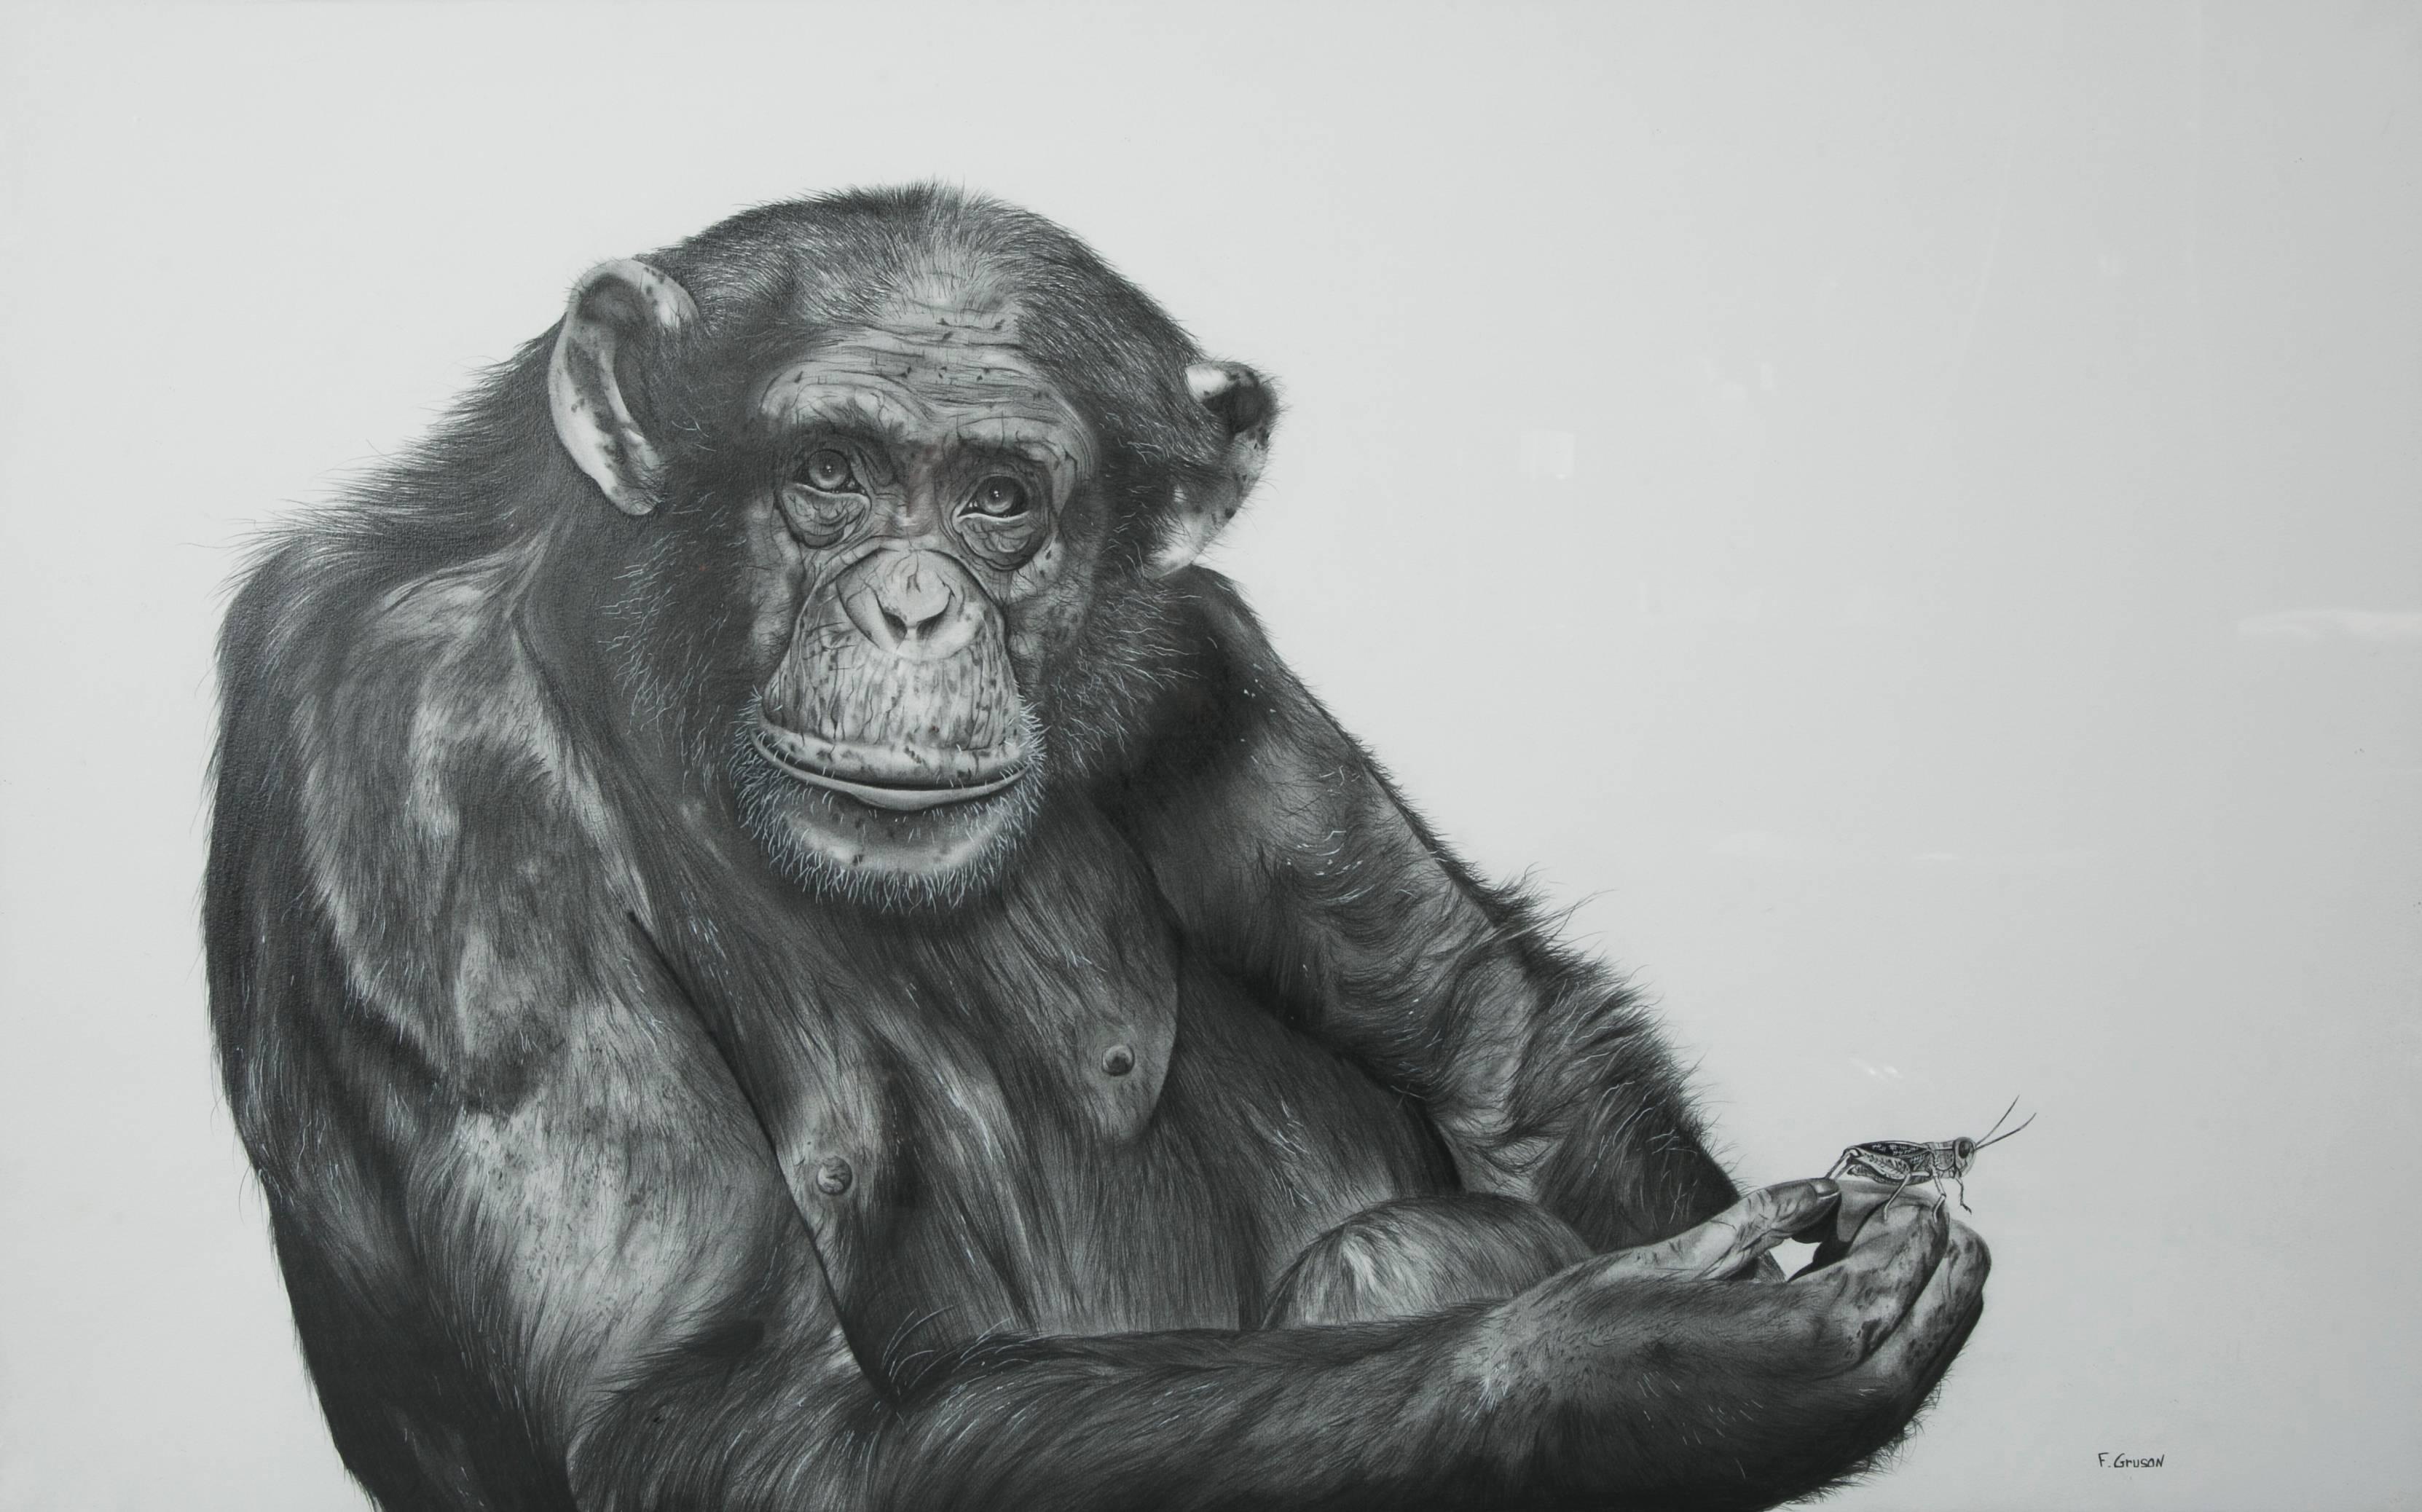 Graphite on paper drawing by François Gruson.
Meticulous and hyperrealist work.
Dimension: Length 100 cm x height 63 cm.
Dimension with metal frame: 110 cm x 73 cm.
 